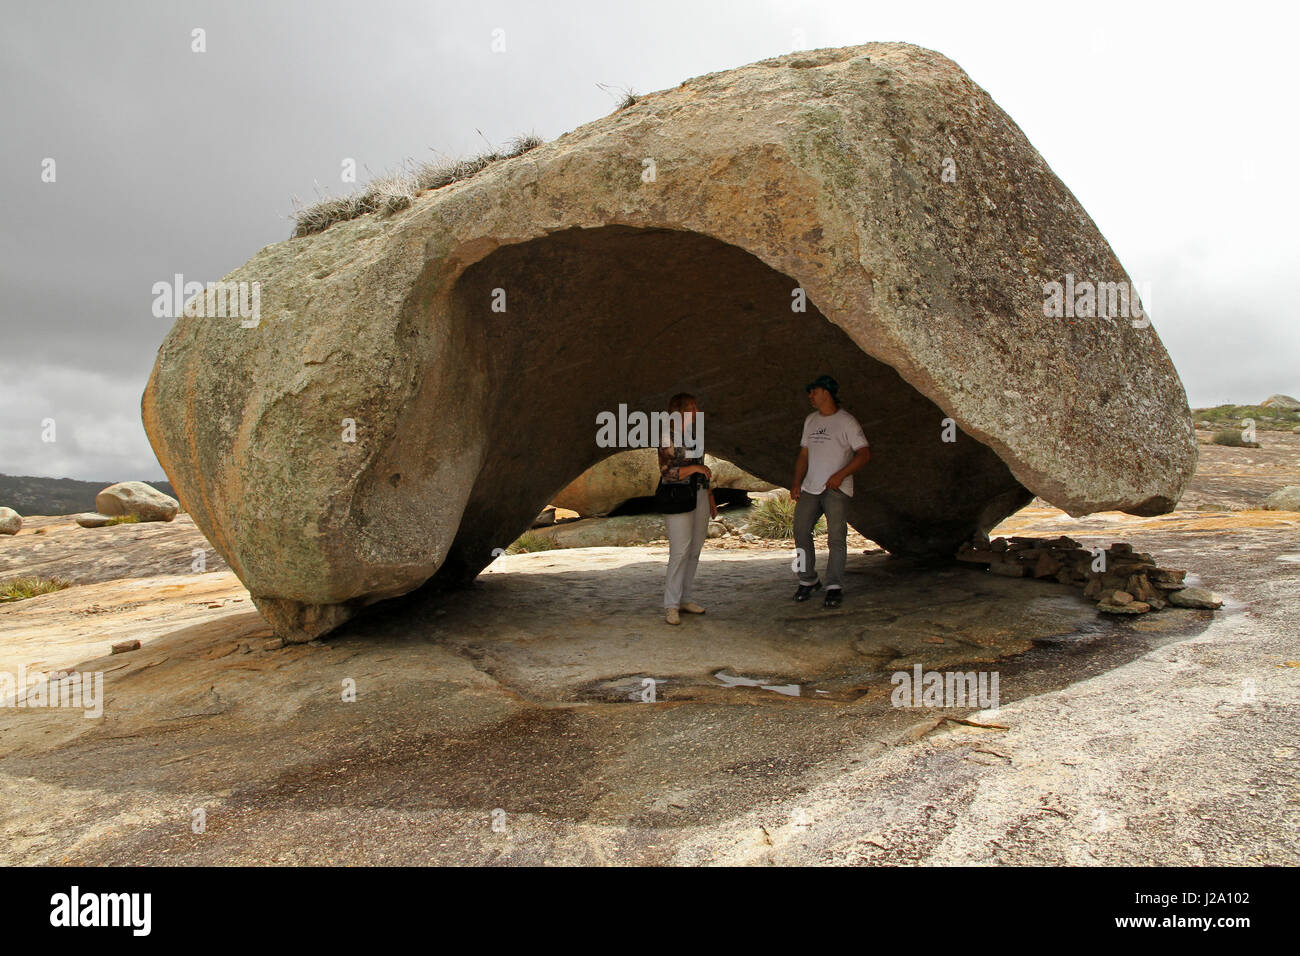 giant hollowed out marble on rock slope Stock Photo